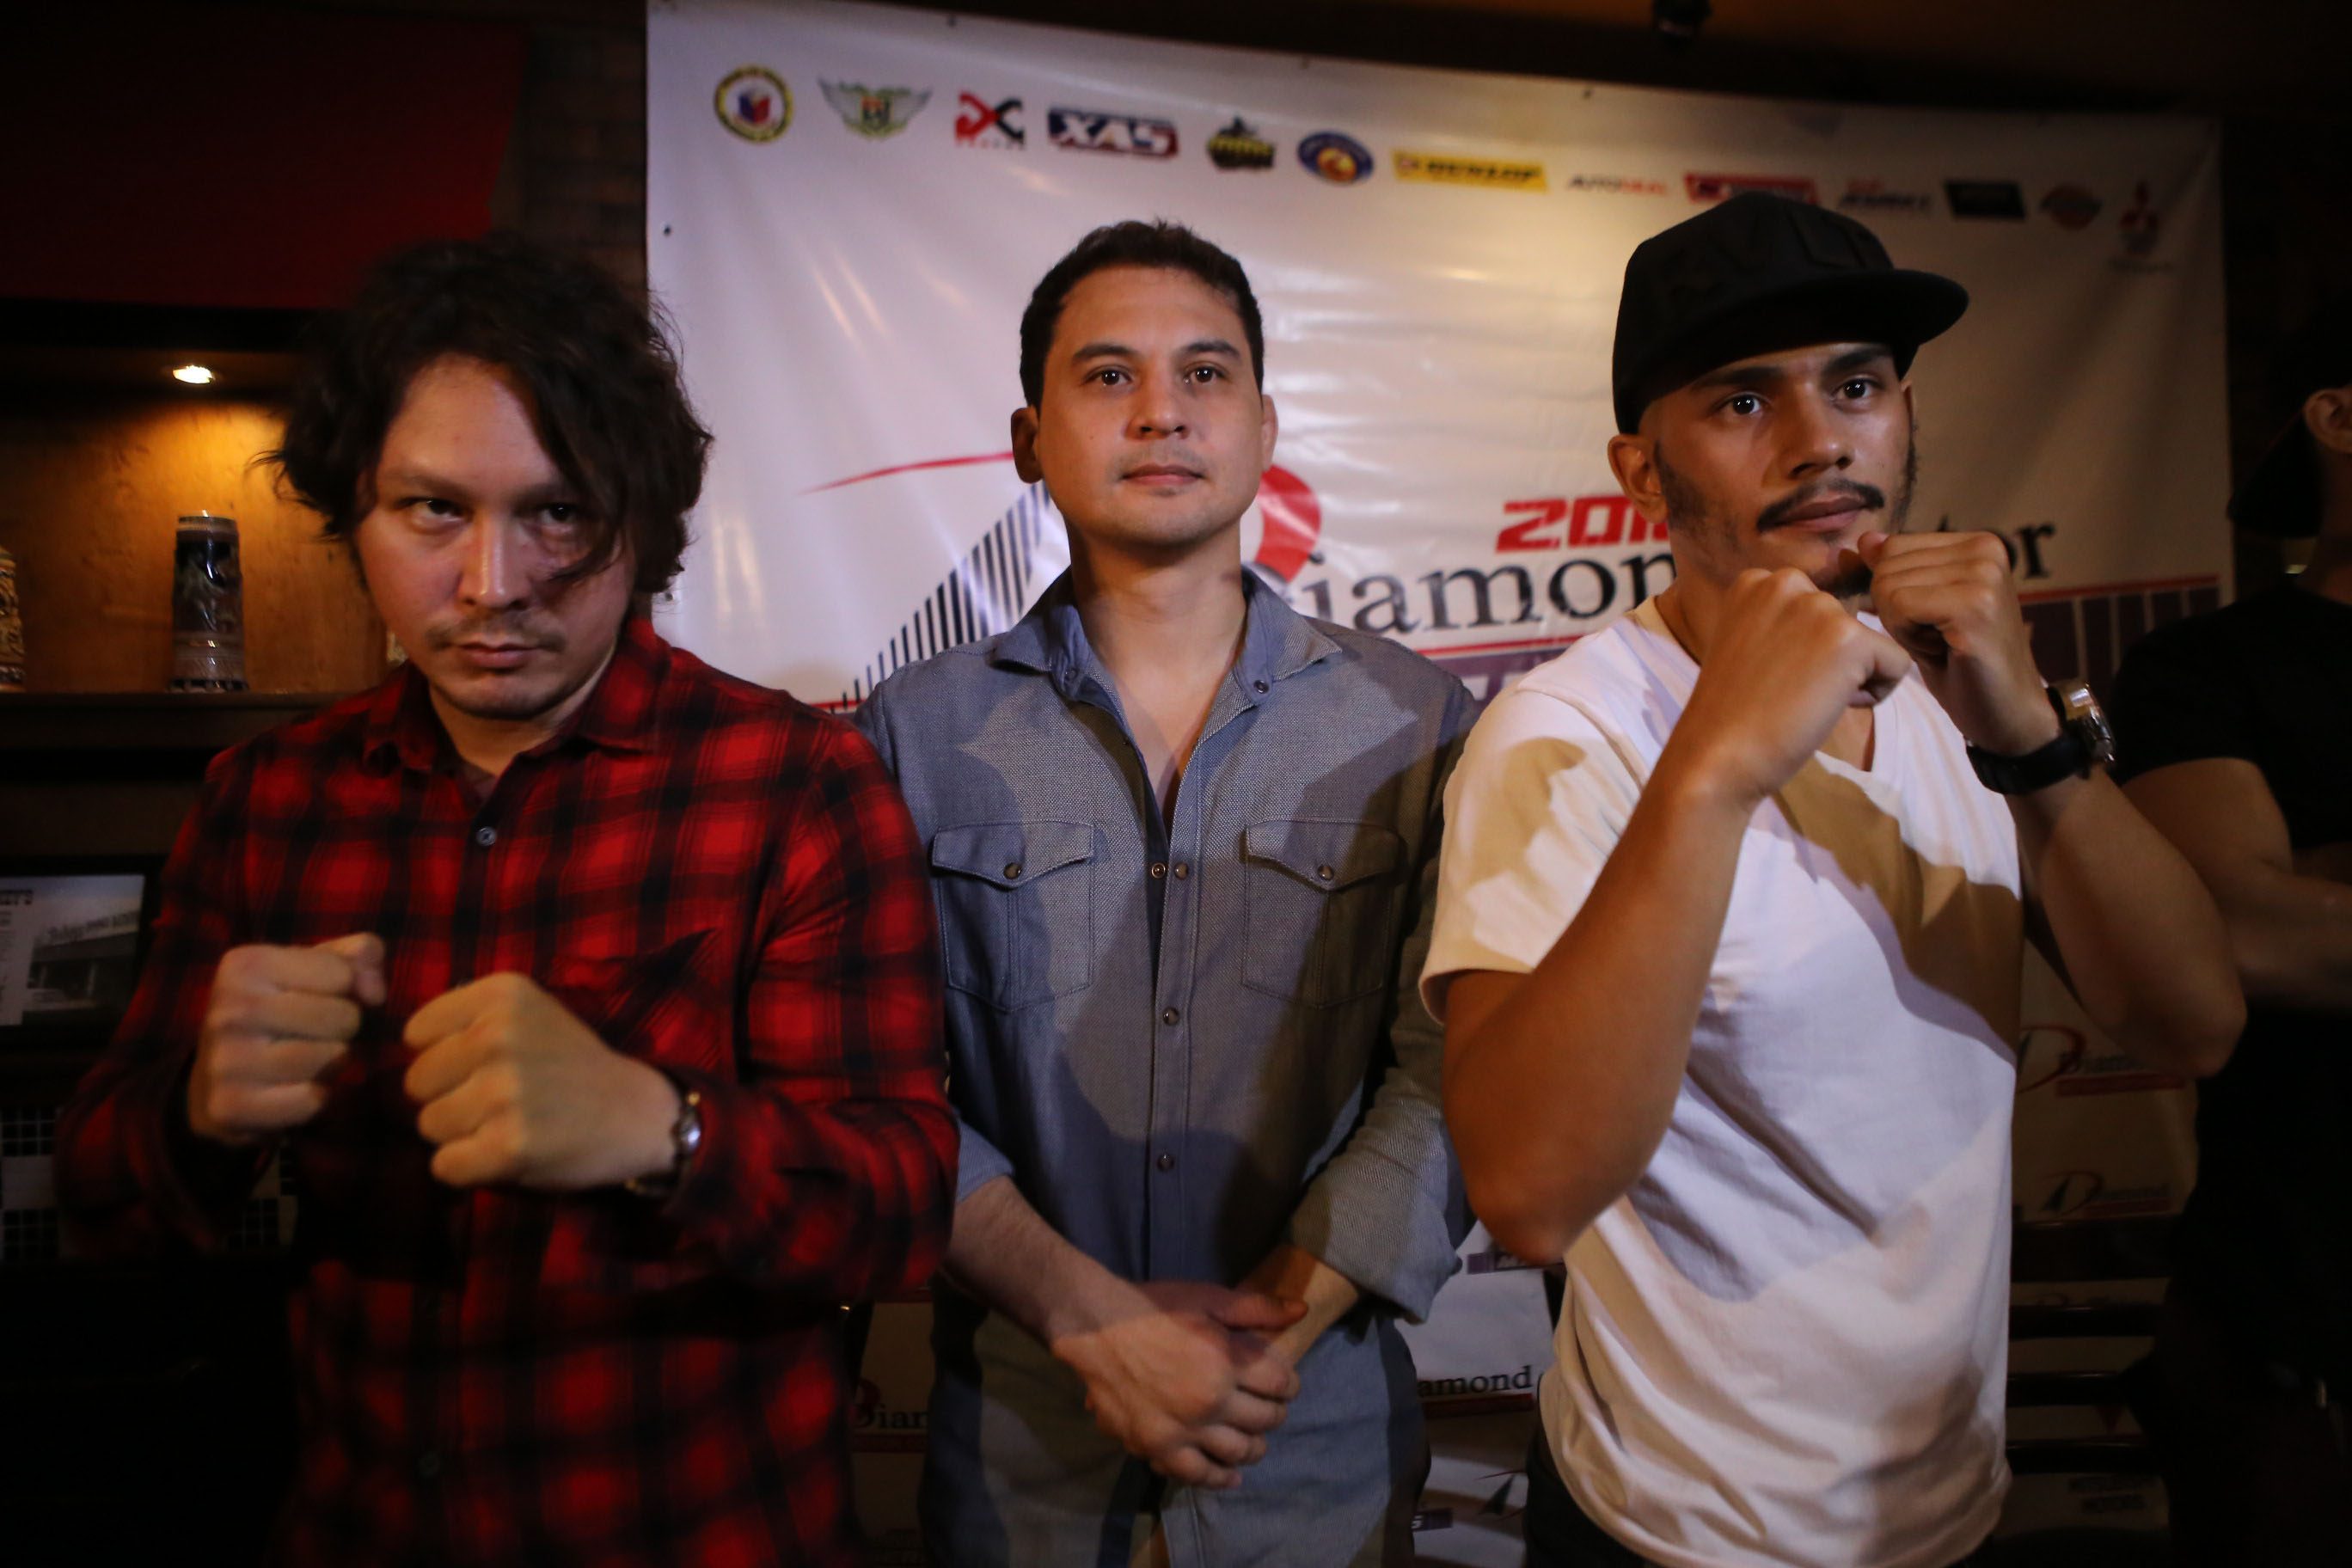 IT'S ON. An MMA match will settle the beef  between Geisler and Matos that started with an altercation at a Quezon City bar. Photo by Josh Albelda/Rappler 